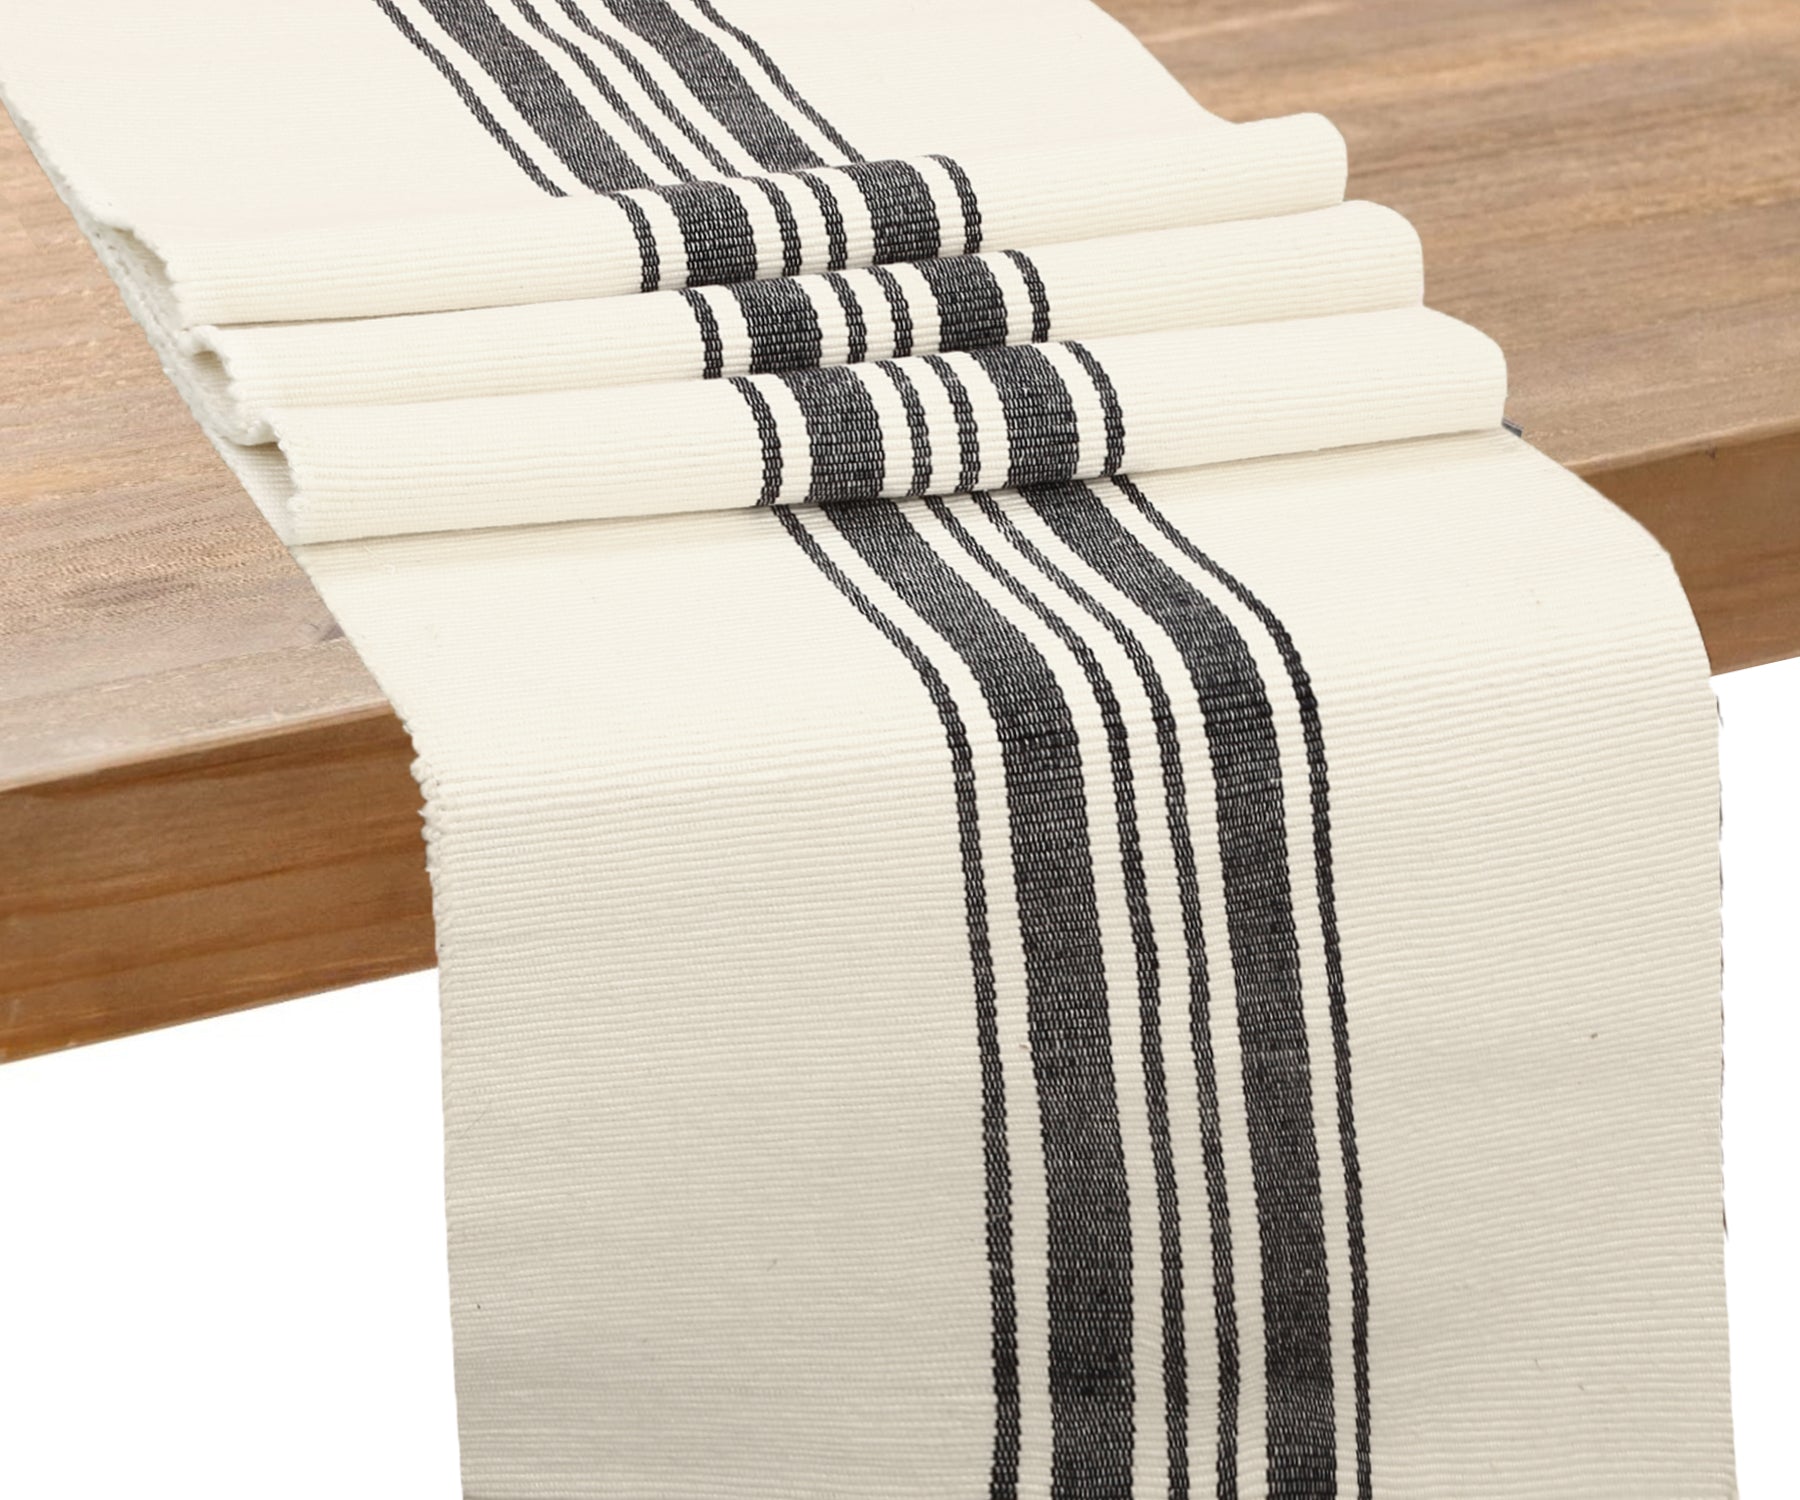 Farmhouse charm with a classic striped table runner.